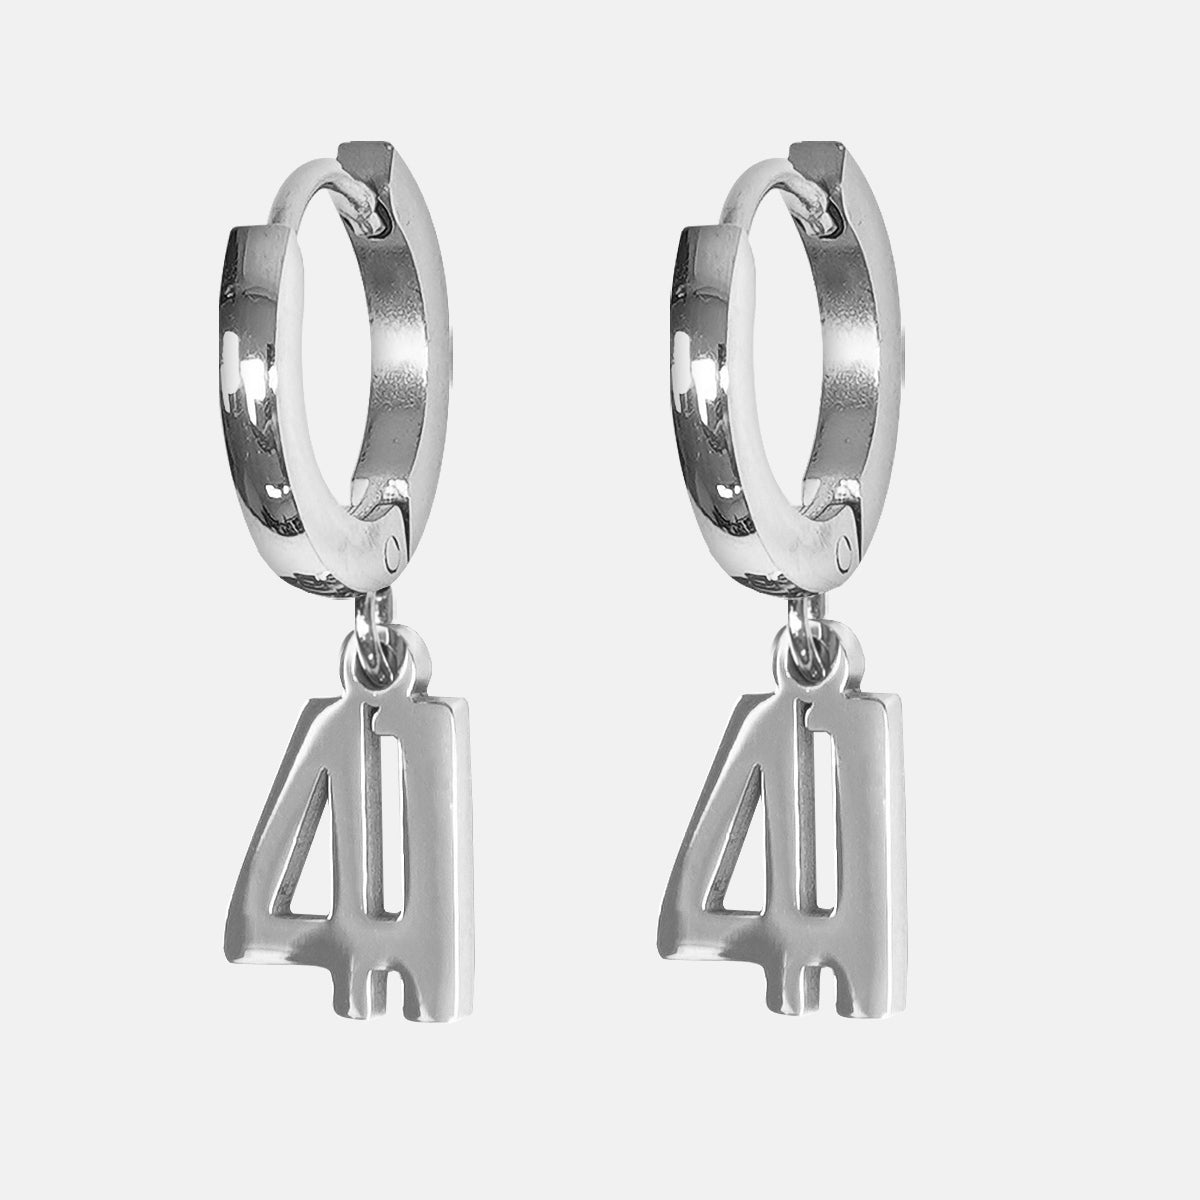 41 Number Earring - Stainless Steel